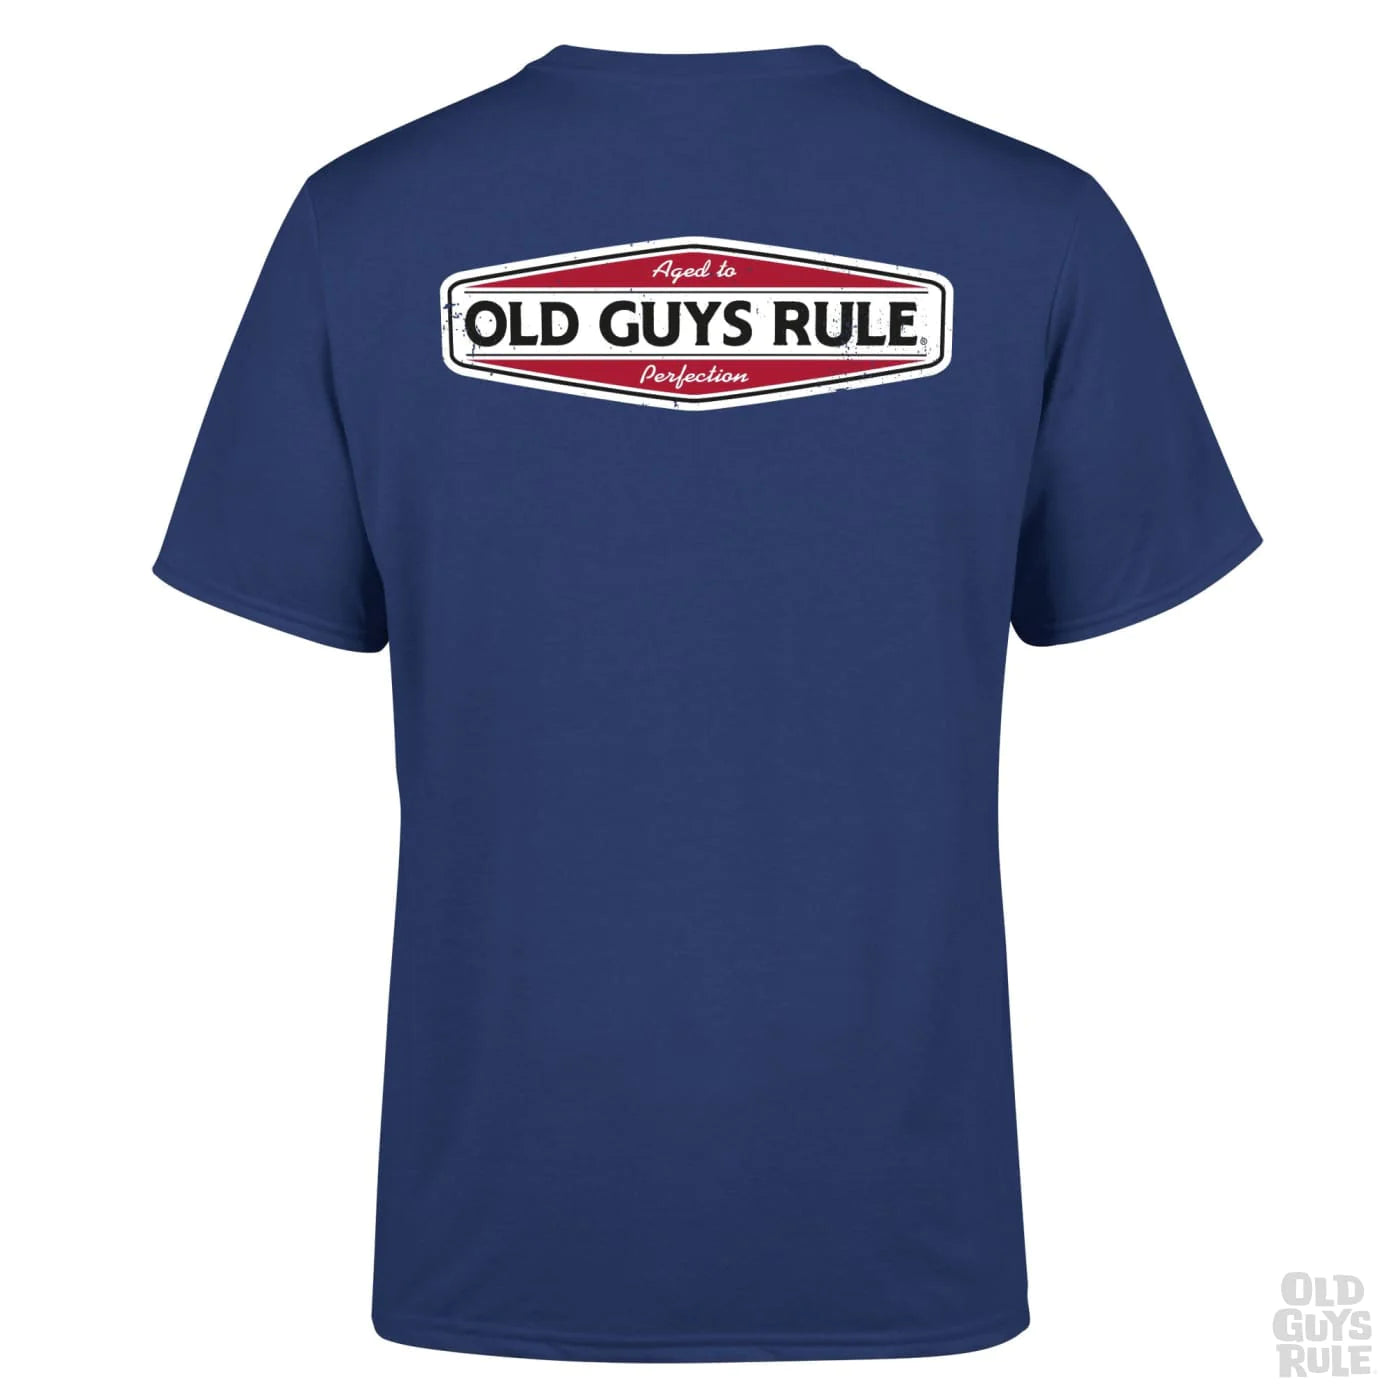 OLD GUYS RULE 'AGED TO PERFECTION II' T-SHIRT - METRO BLUE